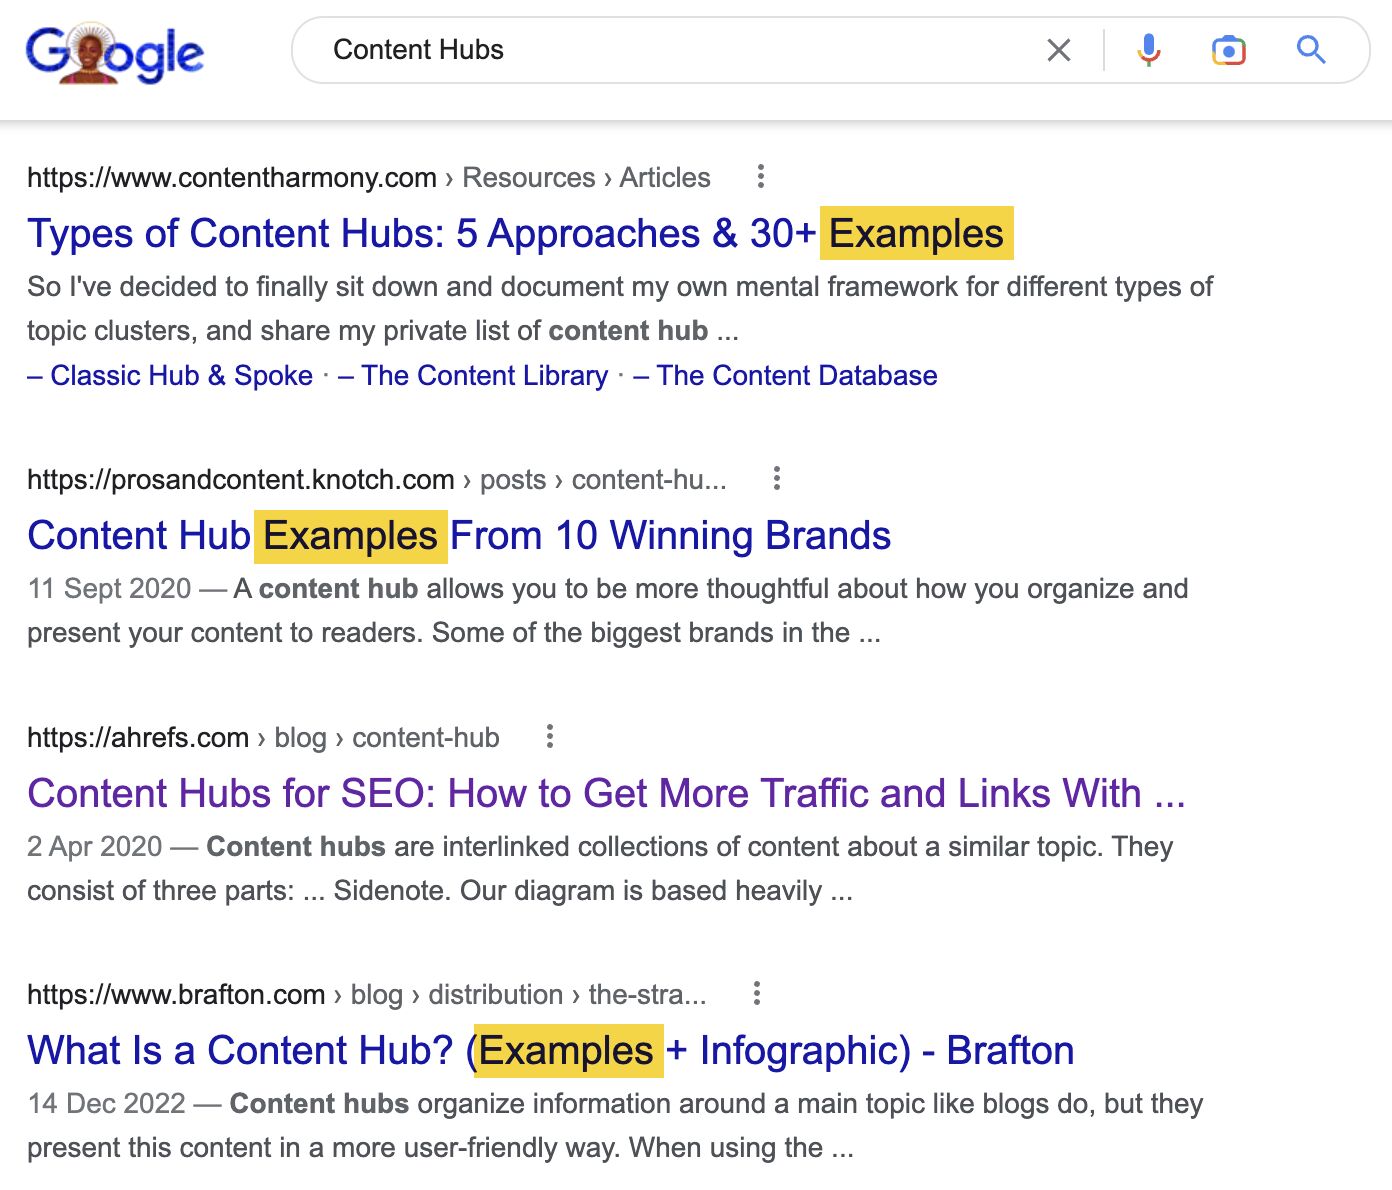 Top results for "content hubs"